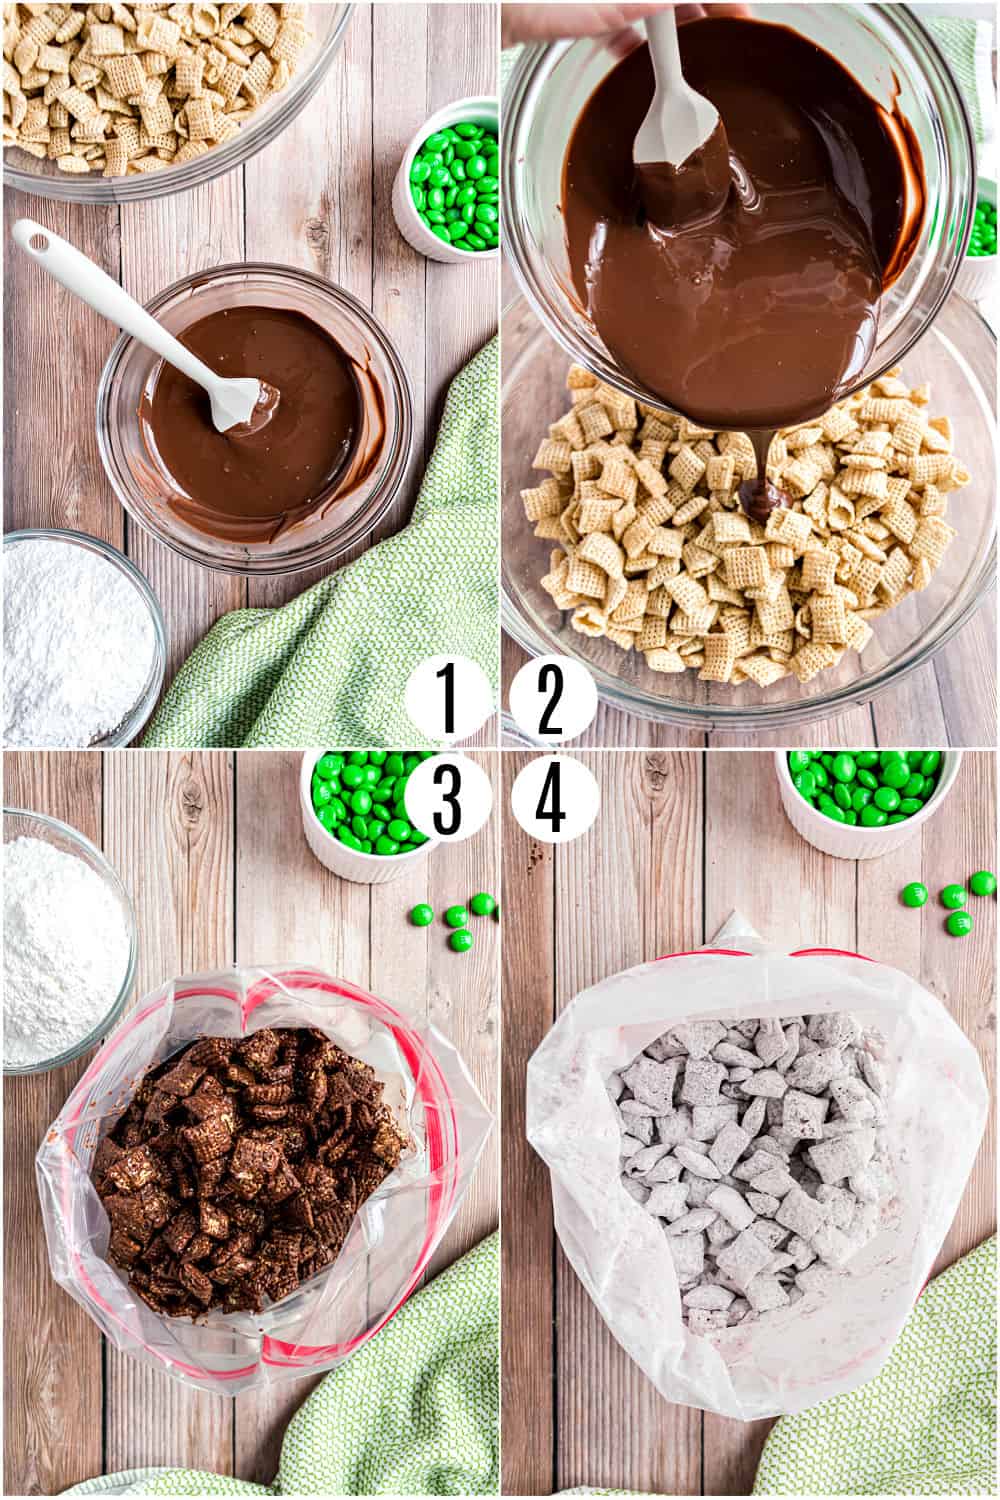 Step by step photos showing how to make thin mint puppy chow.